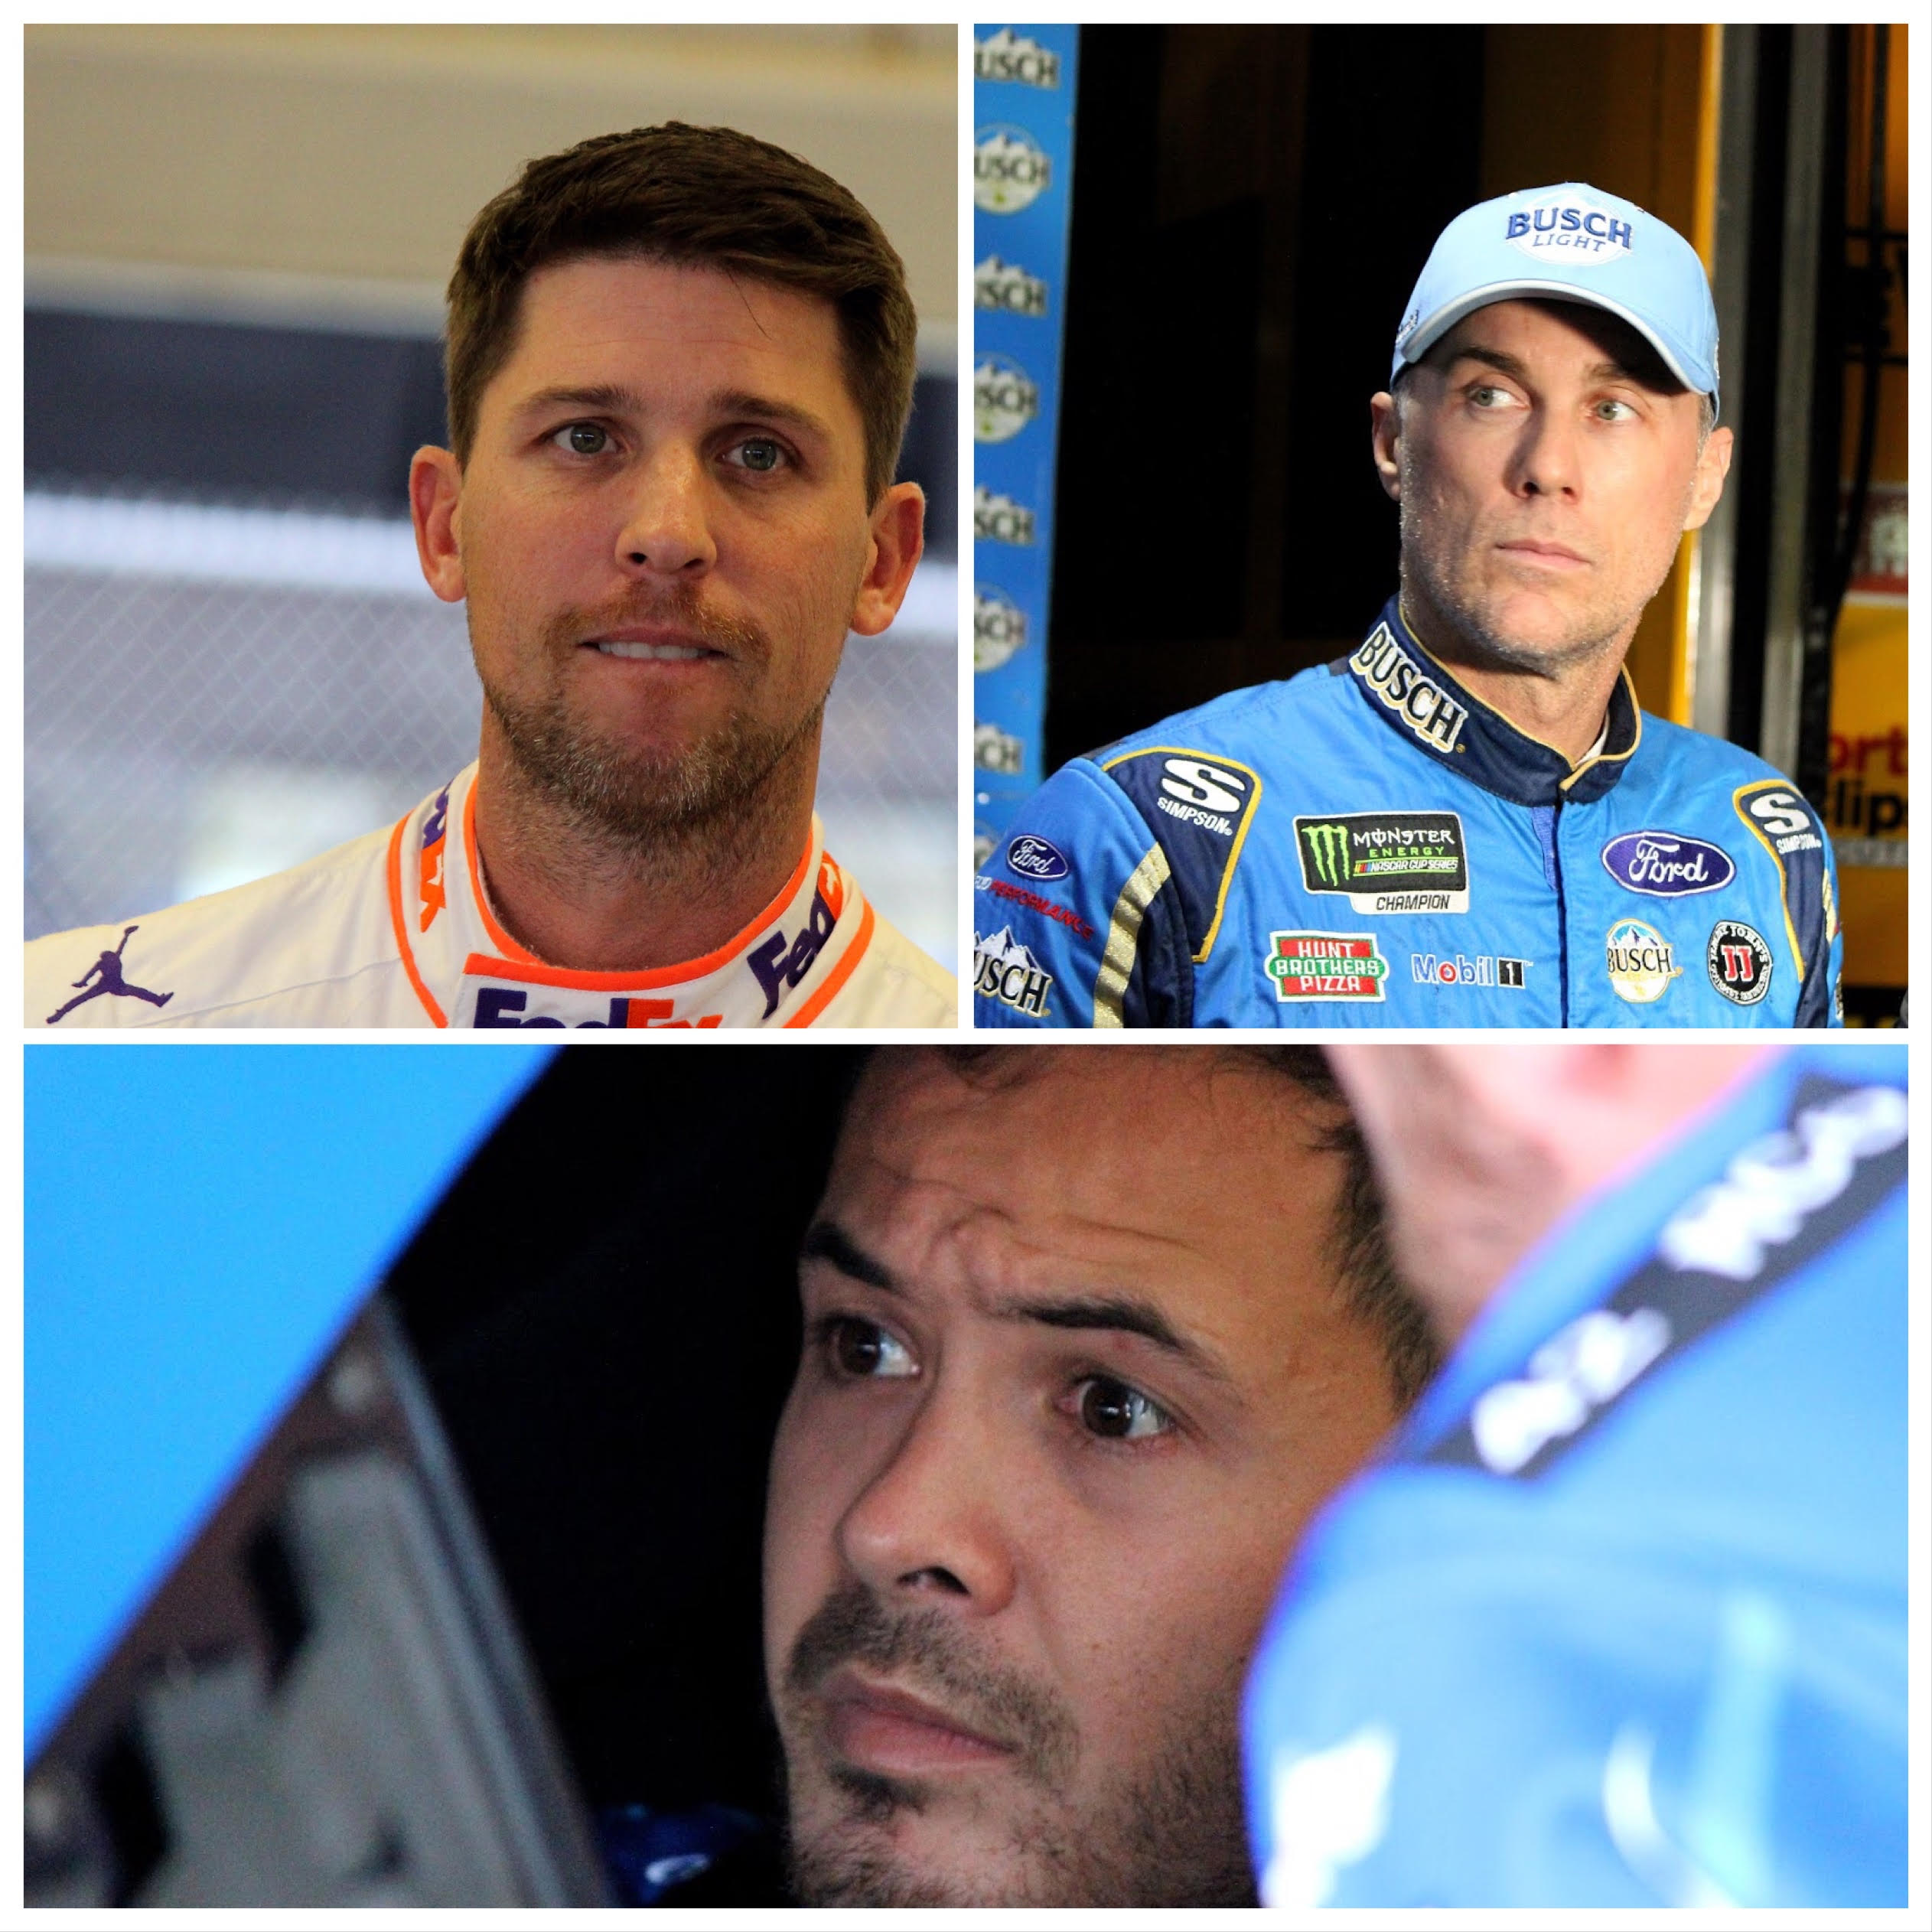 Certainly, any of these can win today's Ford EcoBoost 400 at Homestead. (Photo Credit: Josh Jones/TPF)